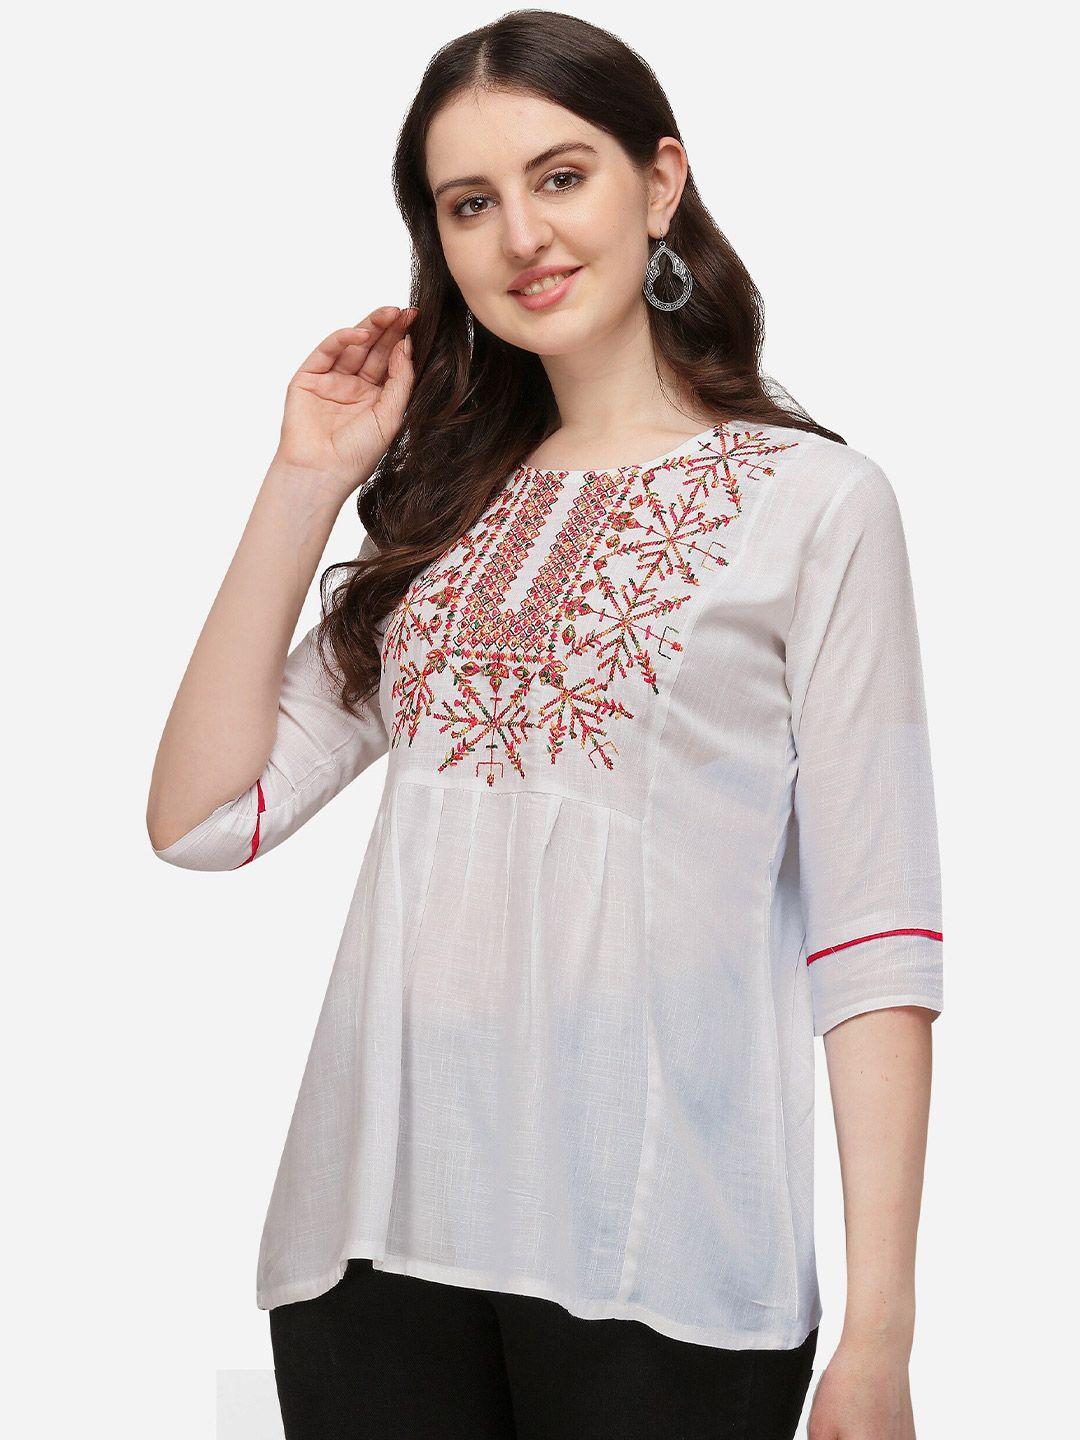 rajgranth-white-&-red-floral-embroidered-kurti